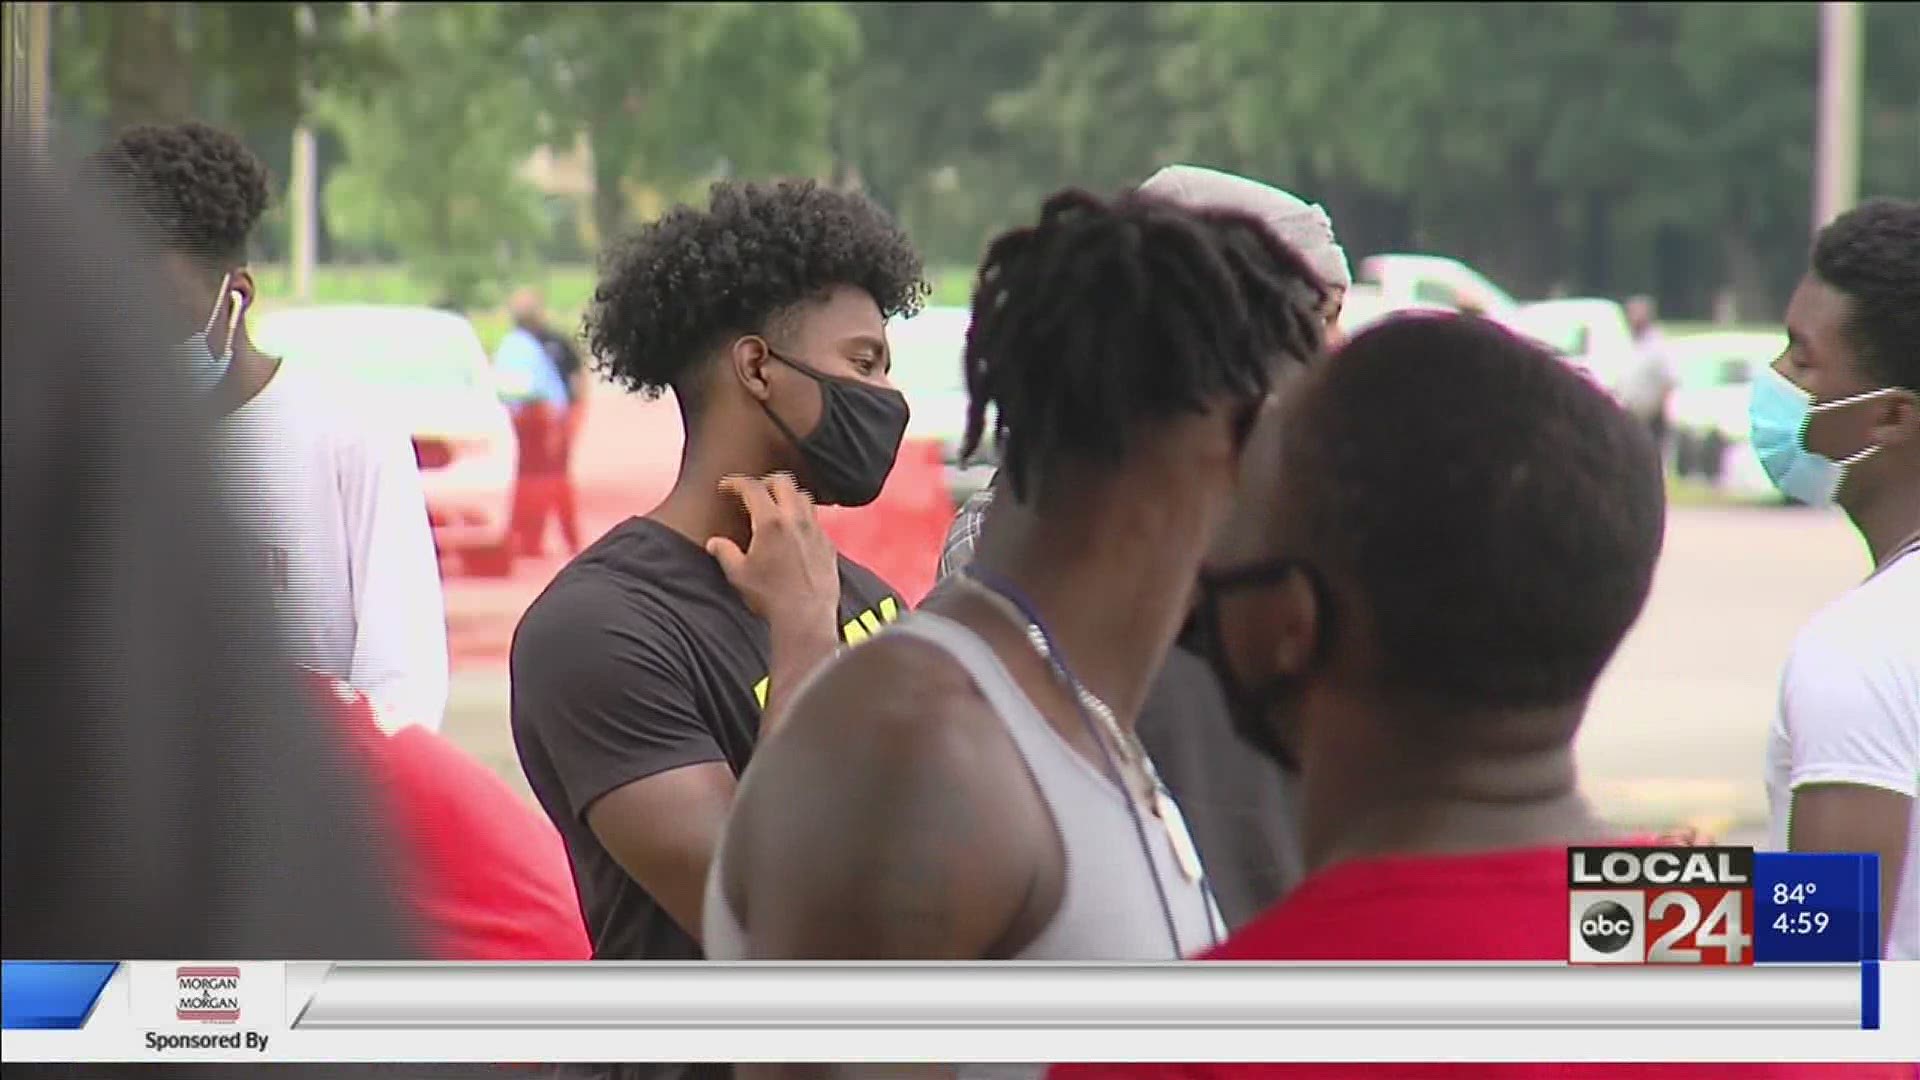 Those protesting want Shelby County Schools to reverse the decision to postpone fall sports.